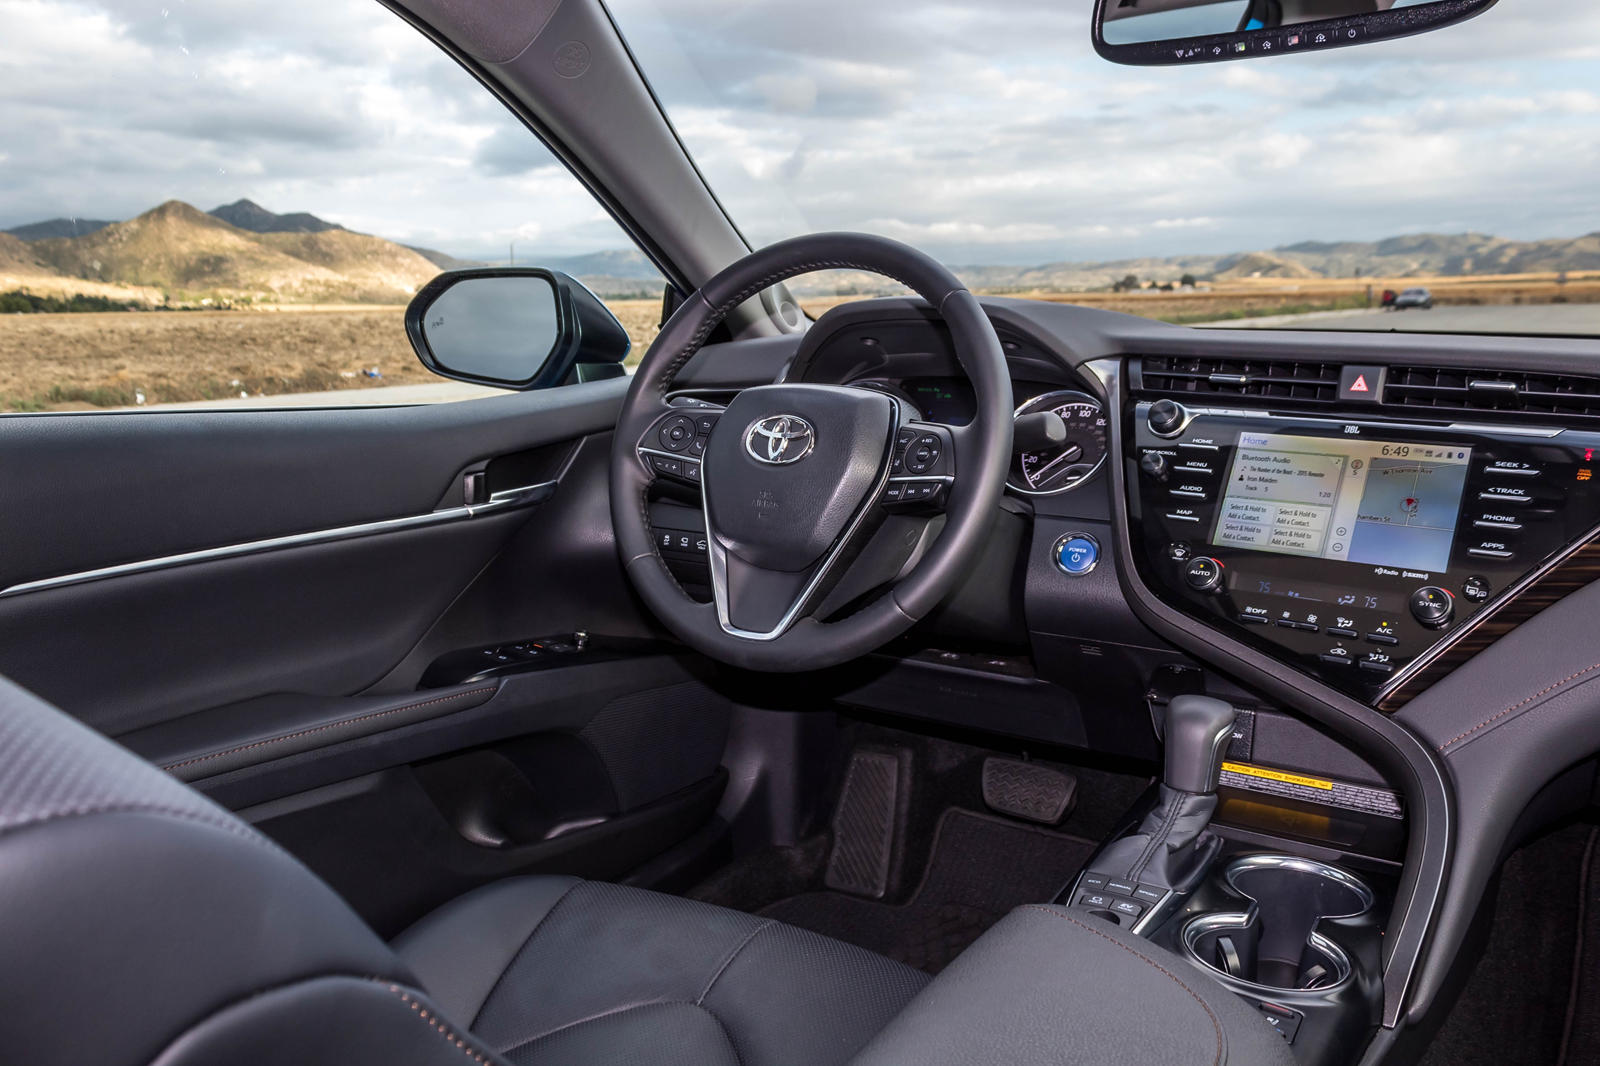 2020 Toyota Camry Hybrid Interior Dimensions: Seating, Cargo Space & Trunk  Size - Photos | CarBuzz